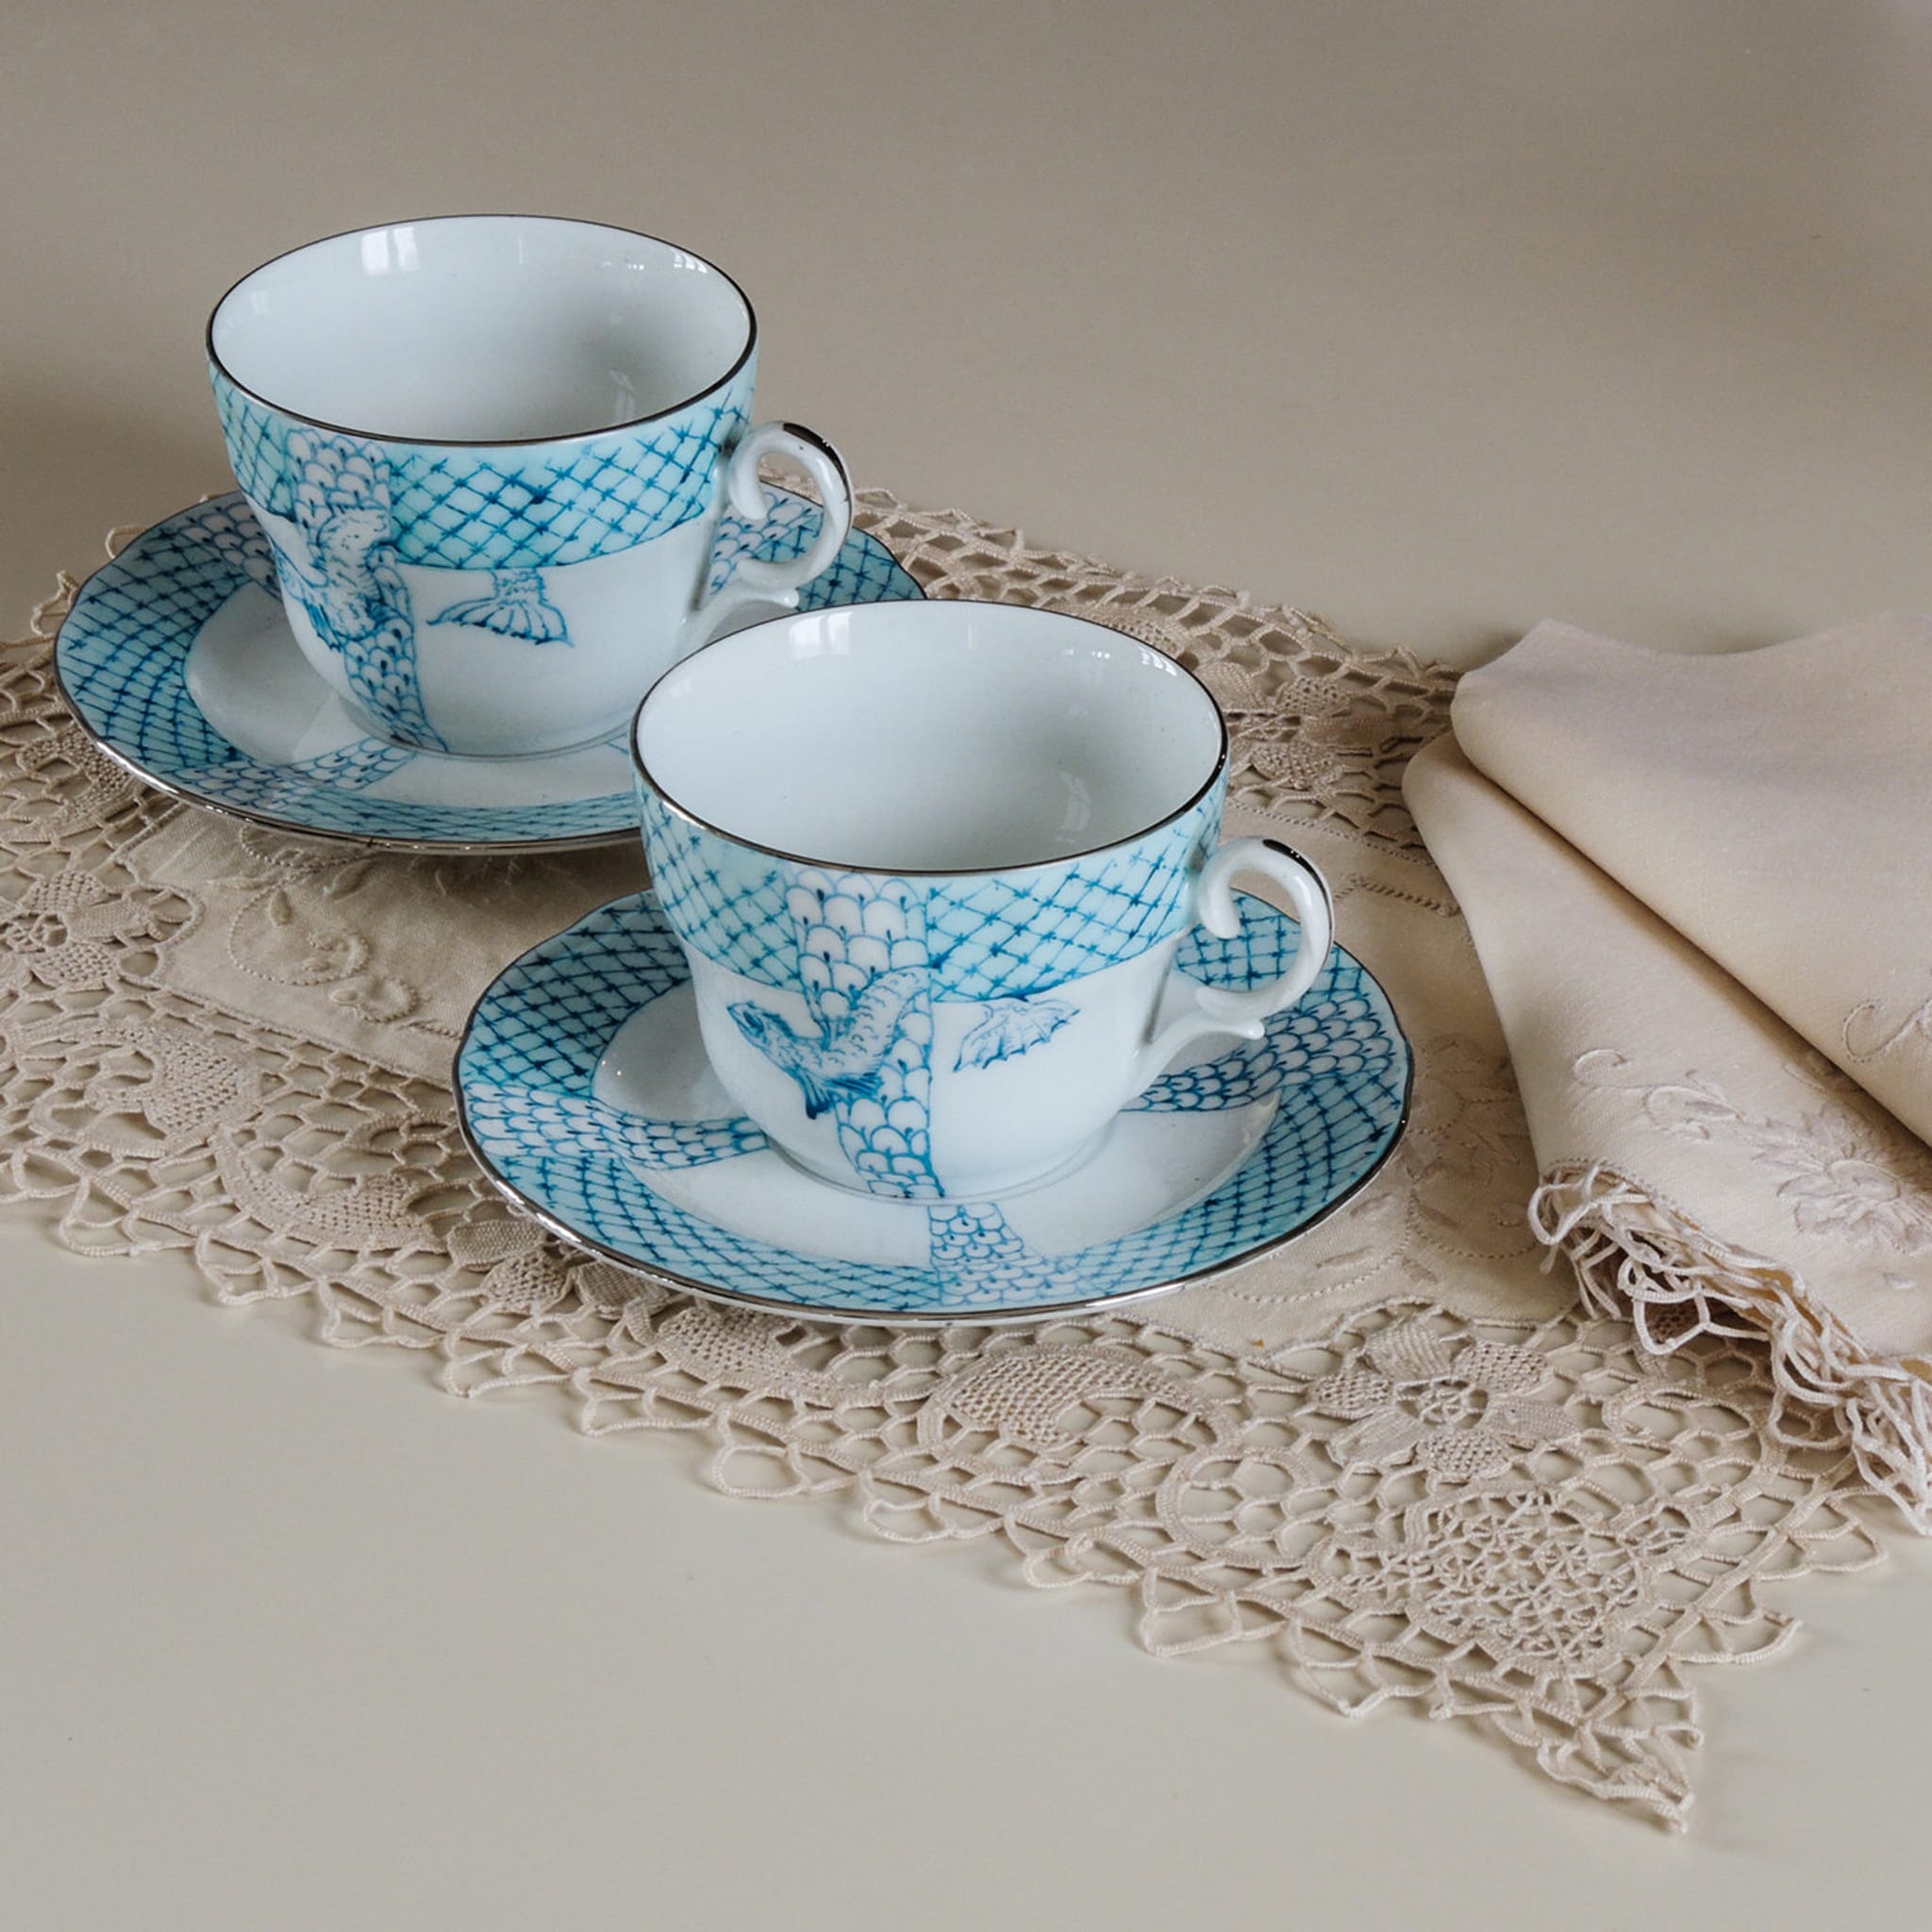 Turquoise Dragon 2 Cups and Saucer Set - Alternative view 3